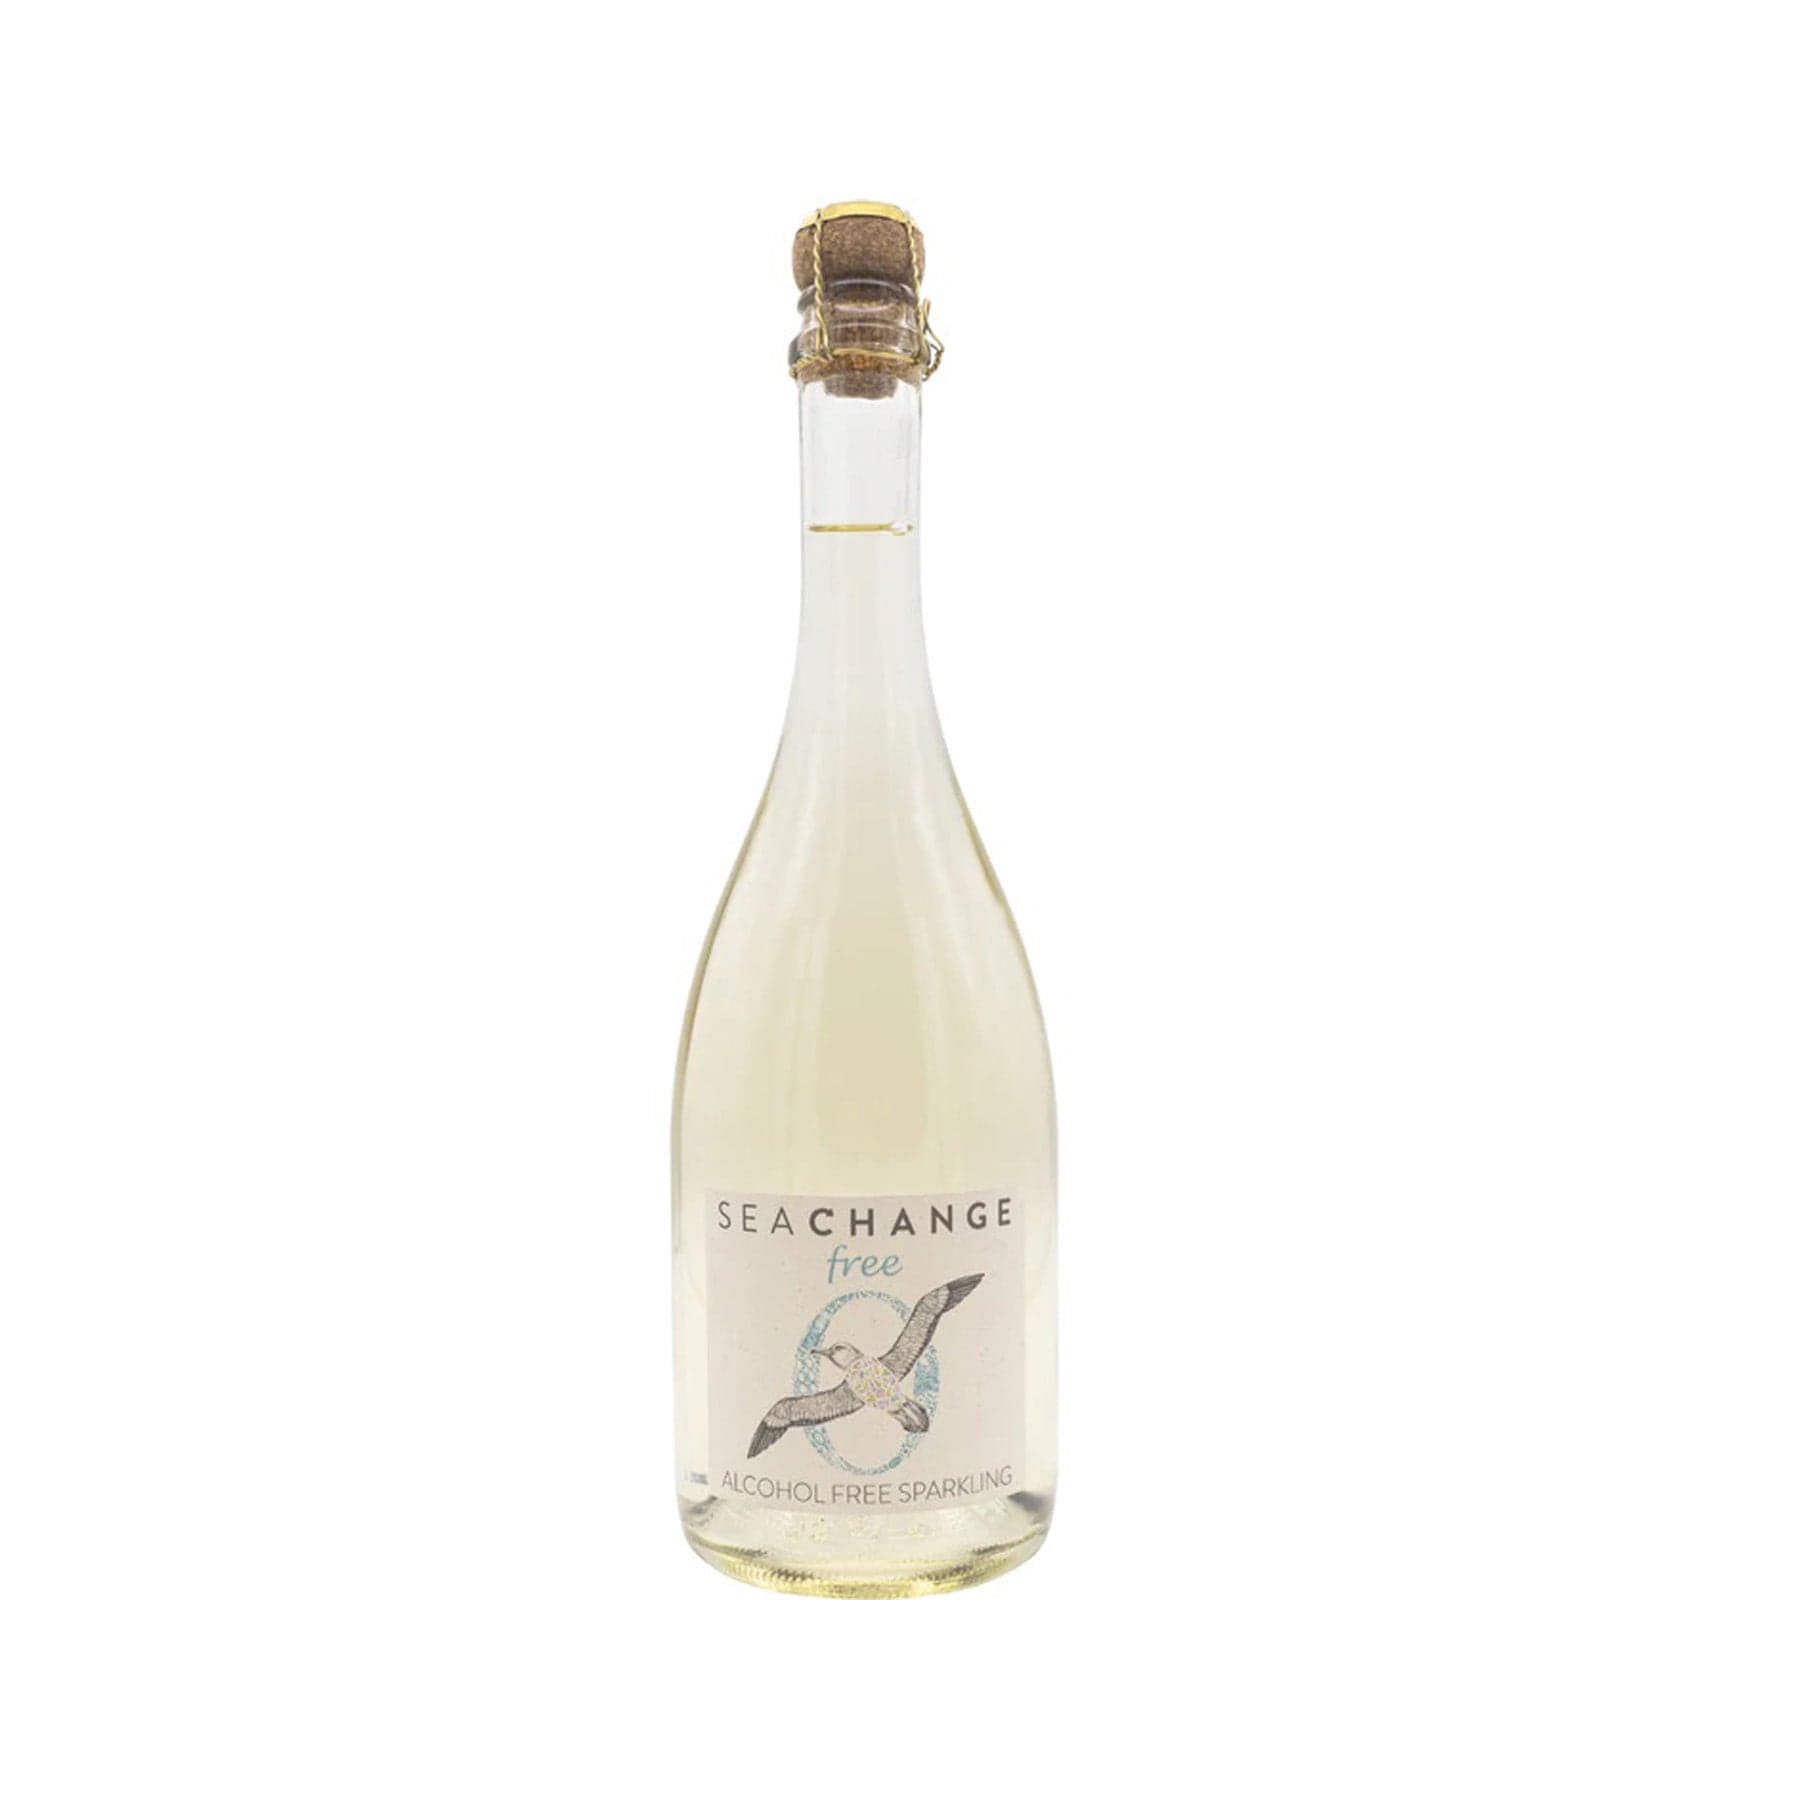 Alt text: Bottle of Seachange Free alcohol-free sparkling wine with a cork and white label featuring a fish illustration on a plain background.